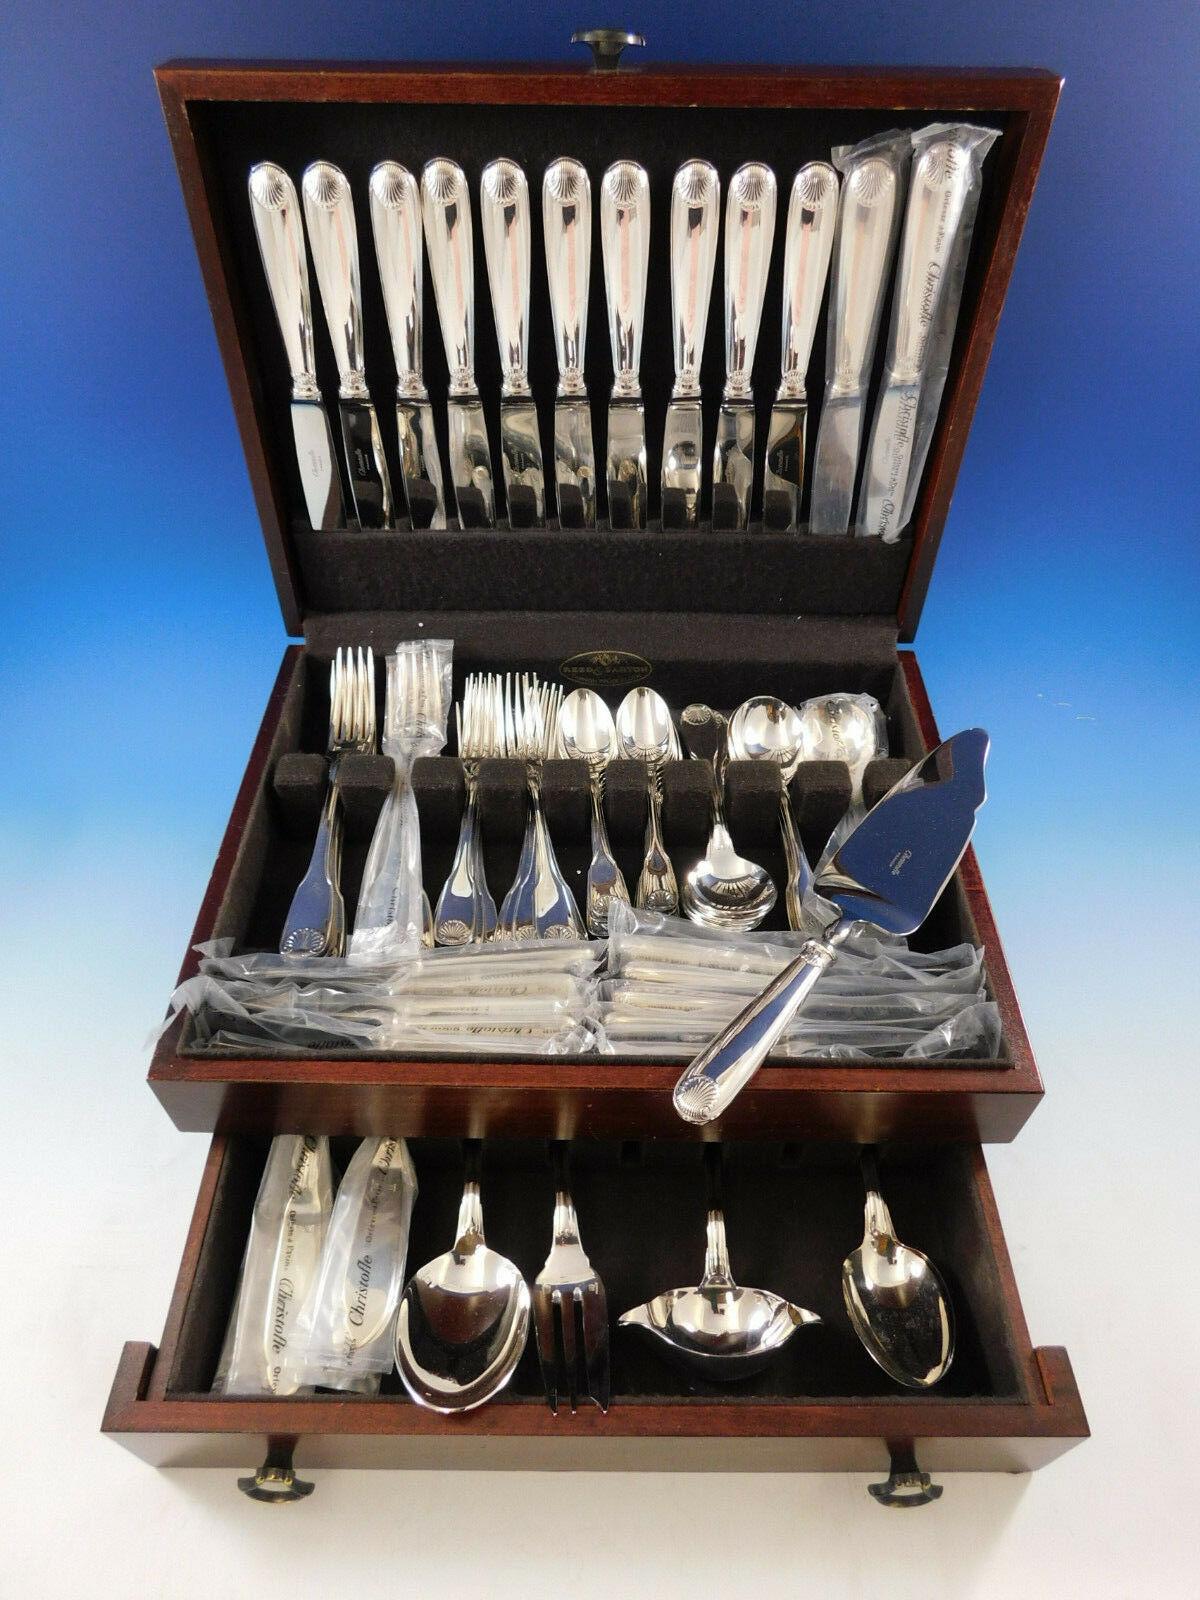 Unused dinner size Vendome Arcantia by Christofle France silver plated flatware set, 90 pieces. This pattern features the same shell motif that adorned the ceremonial silverware used during the reign of King Louis XIV. This set includes:

12